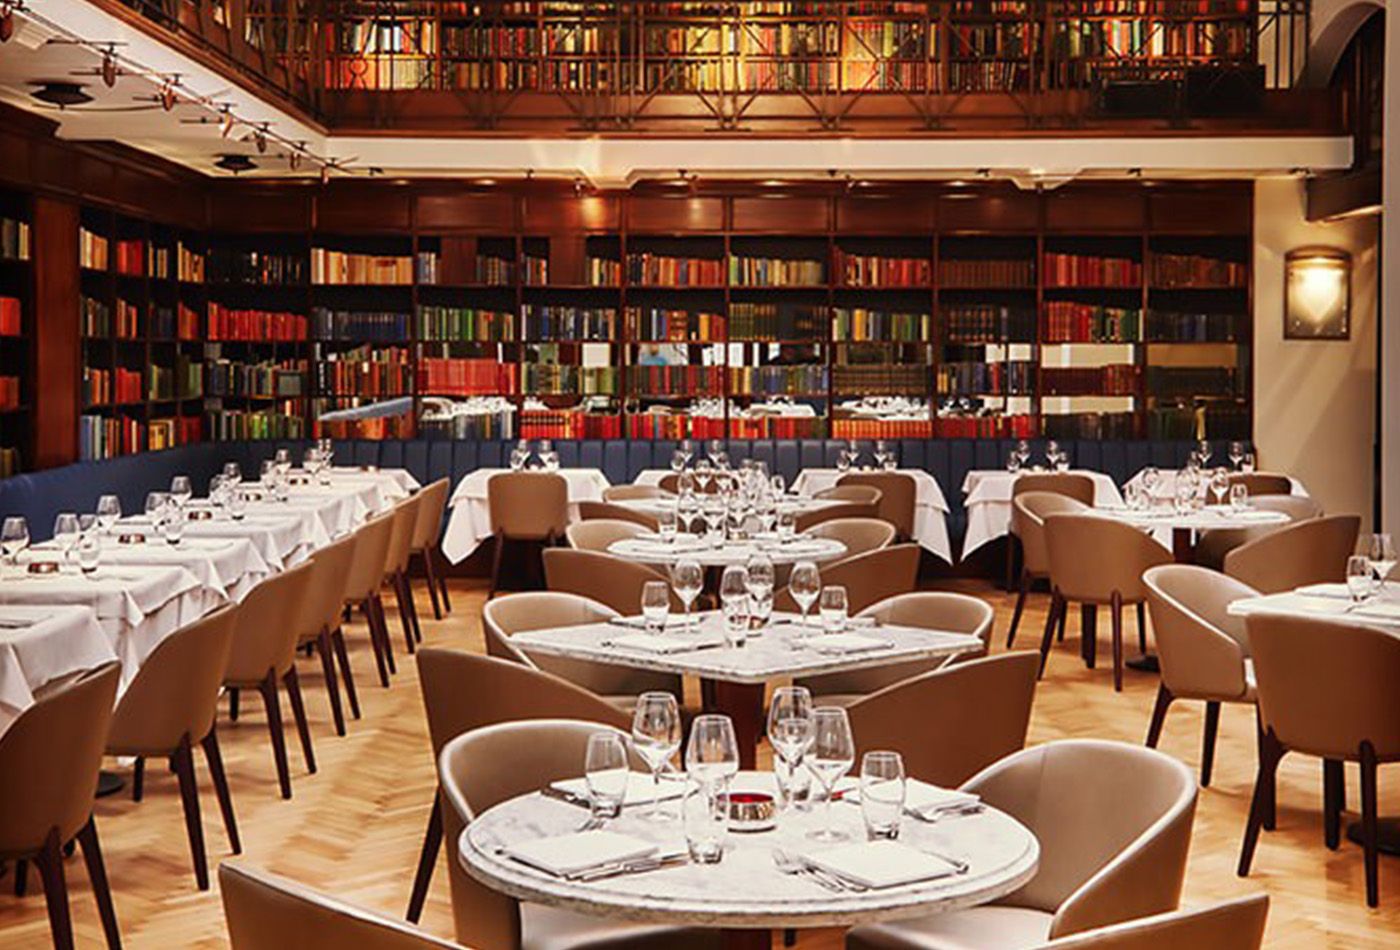 Restaurant set up in large library room surrounded by books